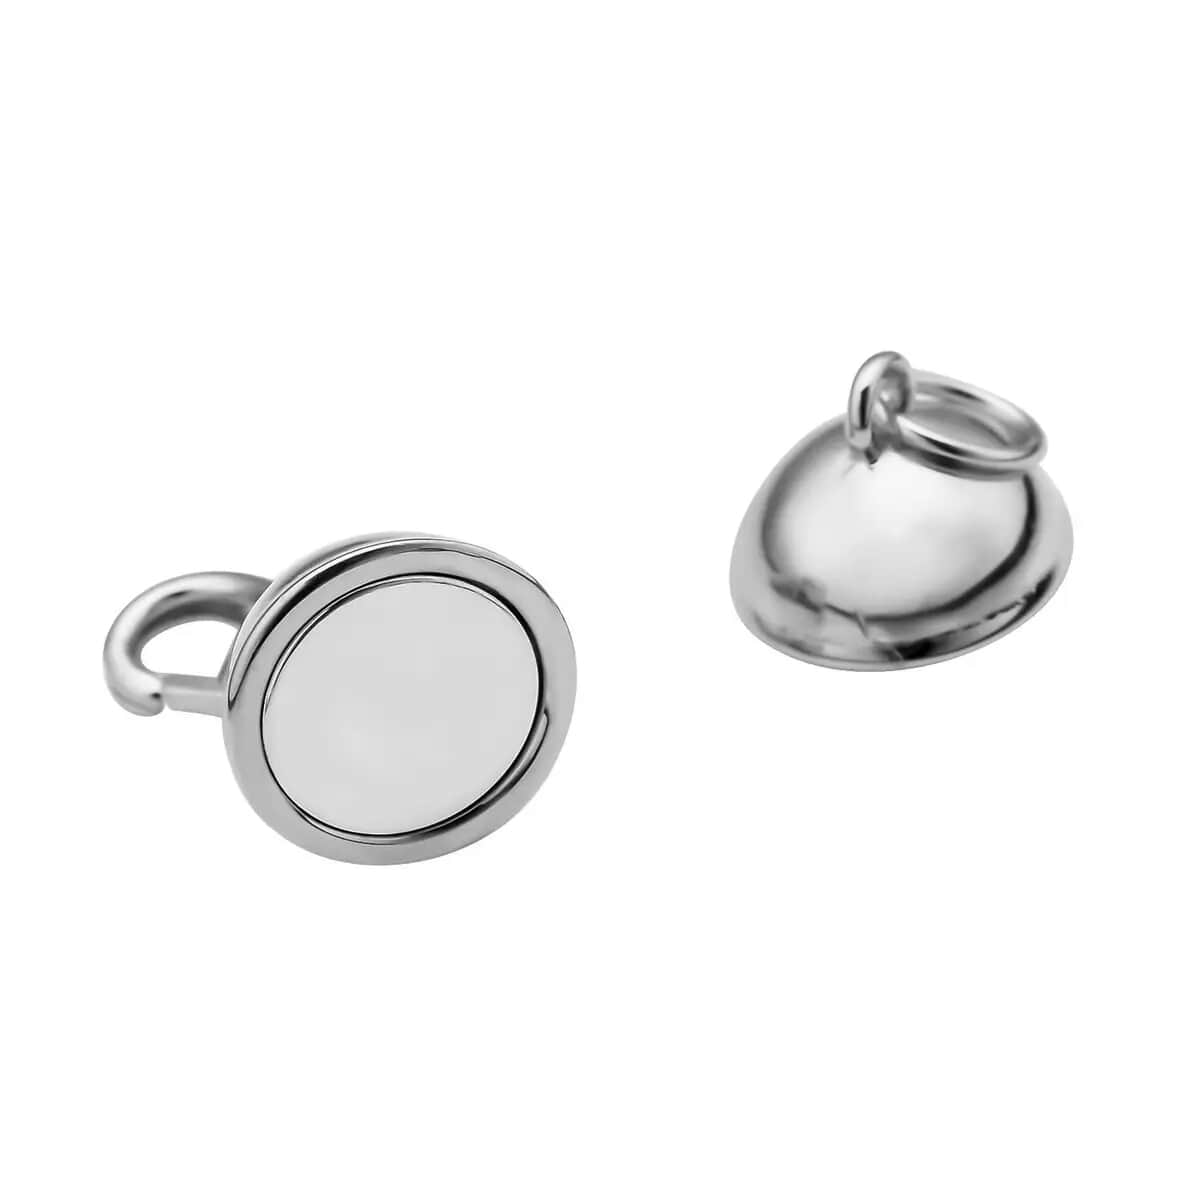 Rhodium Over Sterling Silver Magnetic Lock, Jewelry Lock with Lobster Clasp, Silver Jewelry Clasp, Round Magnetic Lock in Silver 2.50 Grams image number 5